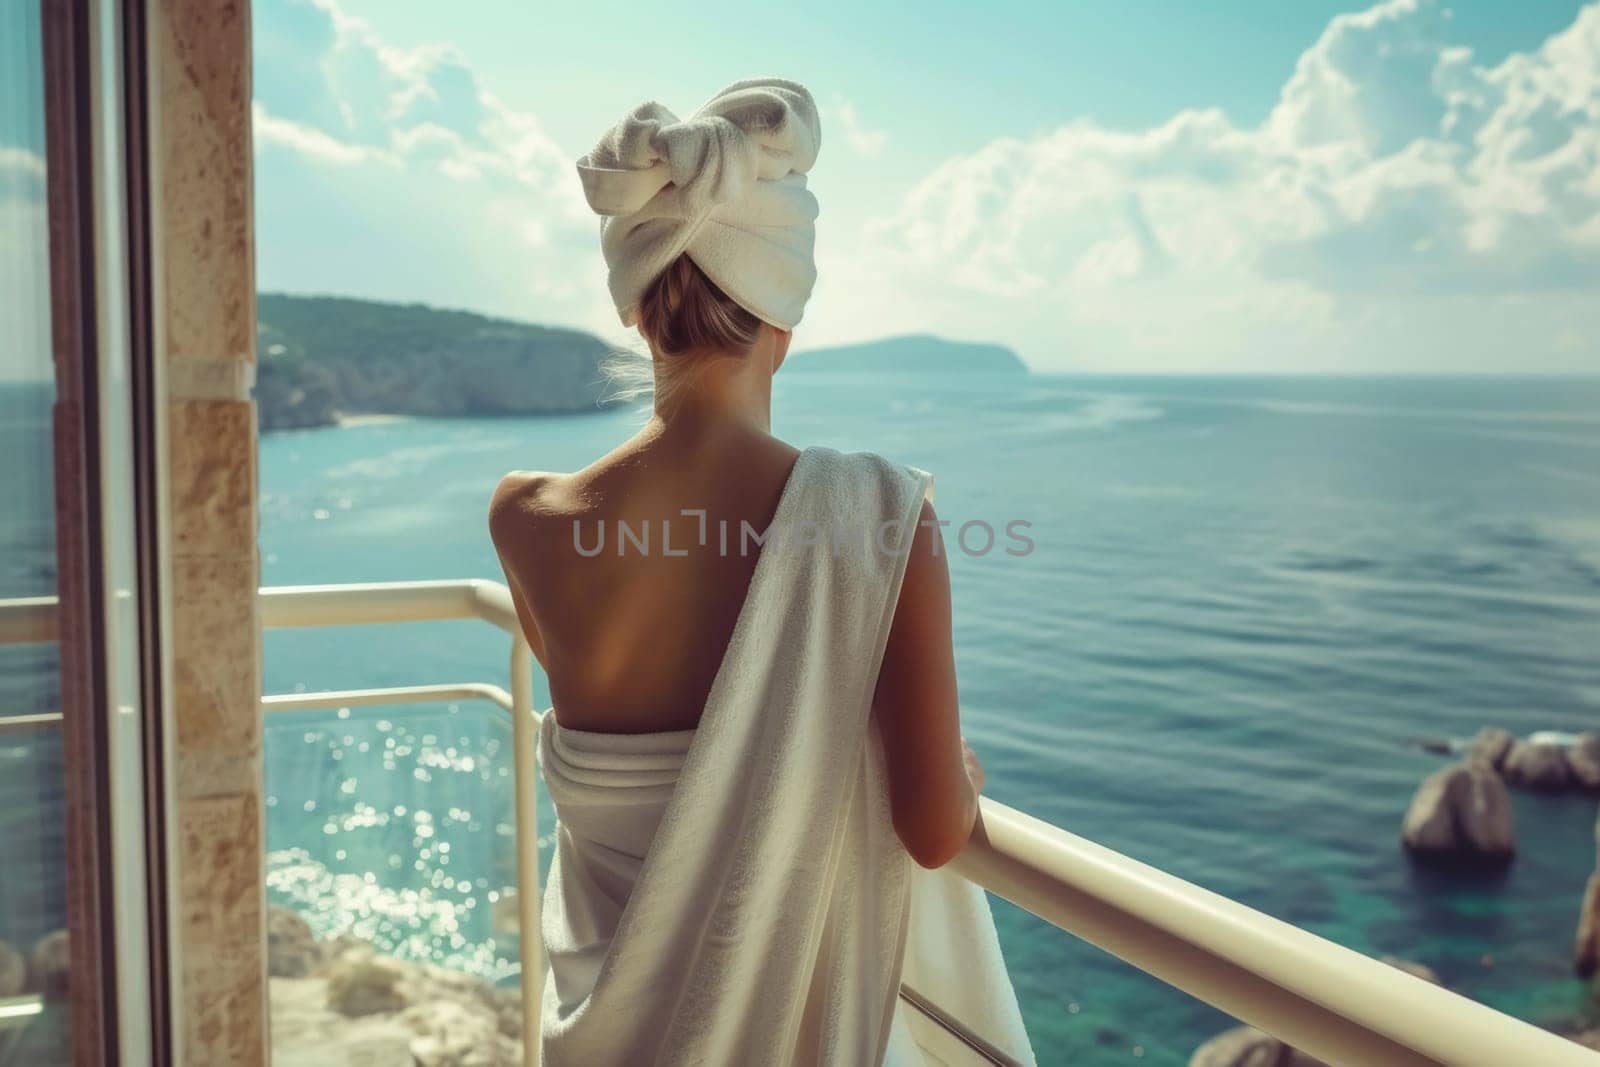 The back view of an individual in a towel, peacefully observing the sunset from a ship's deck, evokes a sense of calm and reflection